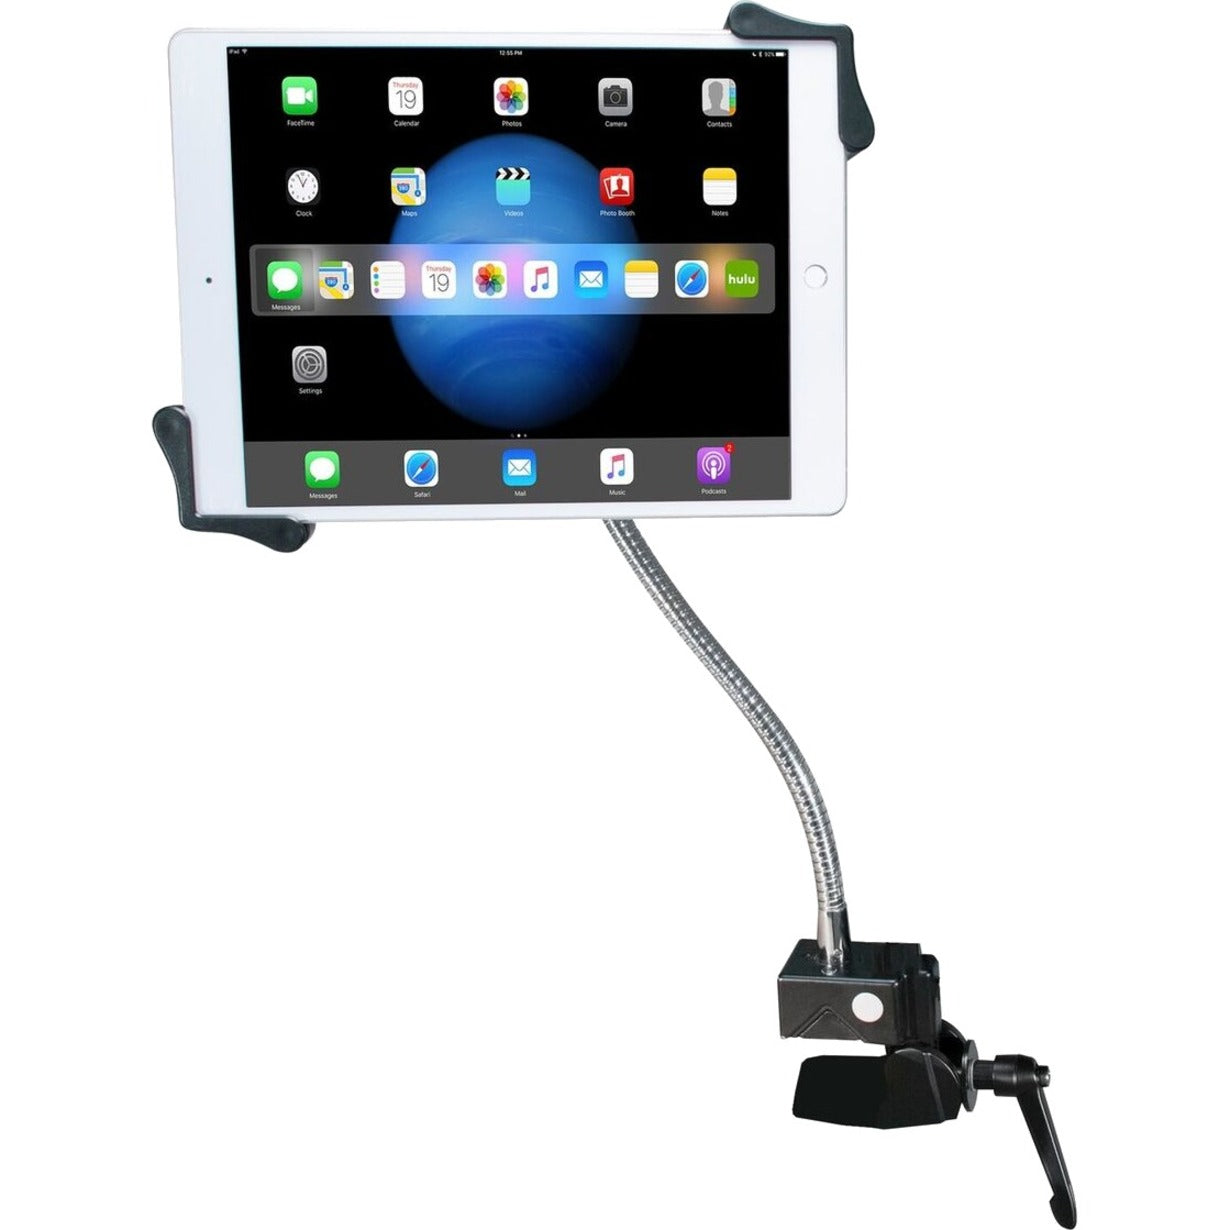 CTA Digital PAD-HGT Heavy-Duty Gooseneck Clamp Stand for 7-13" Inch Tablets, iPad, Tablet - Black